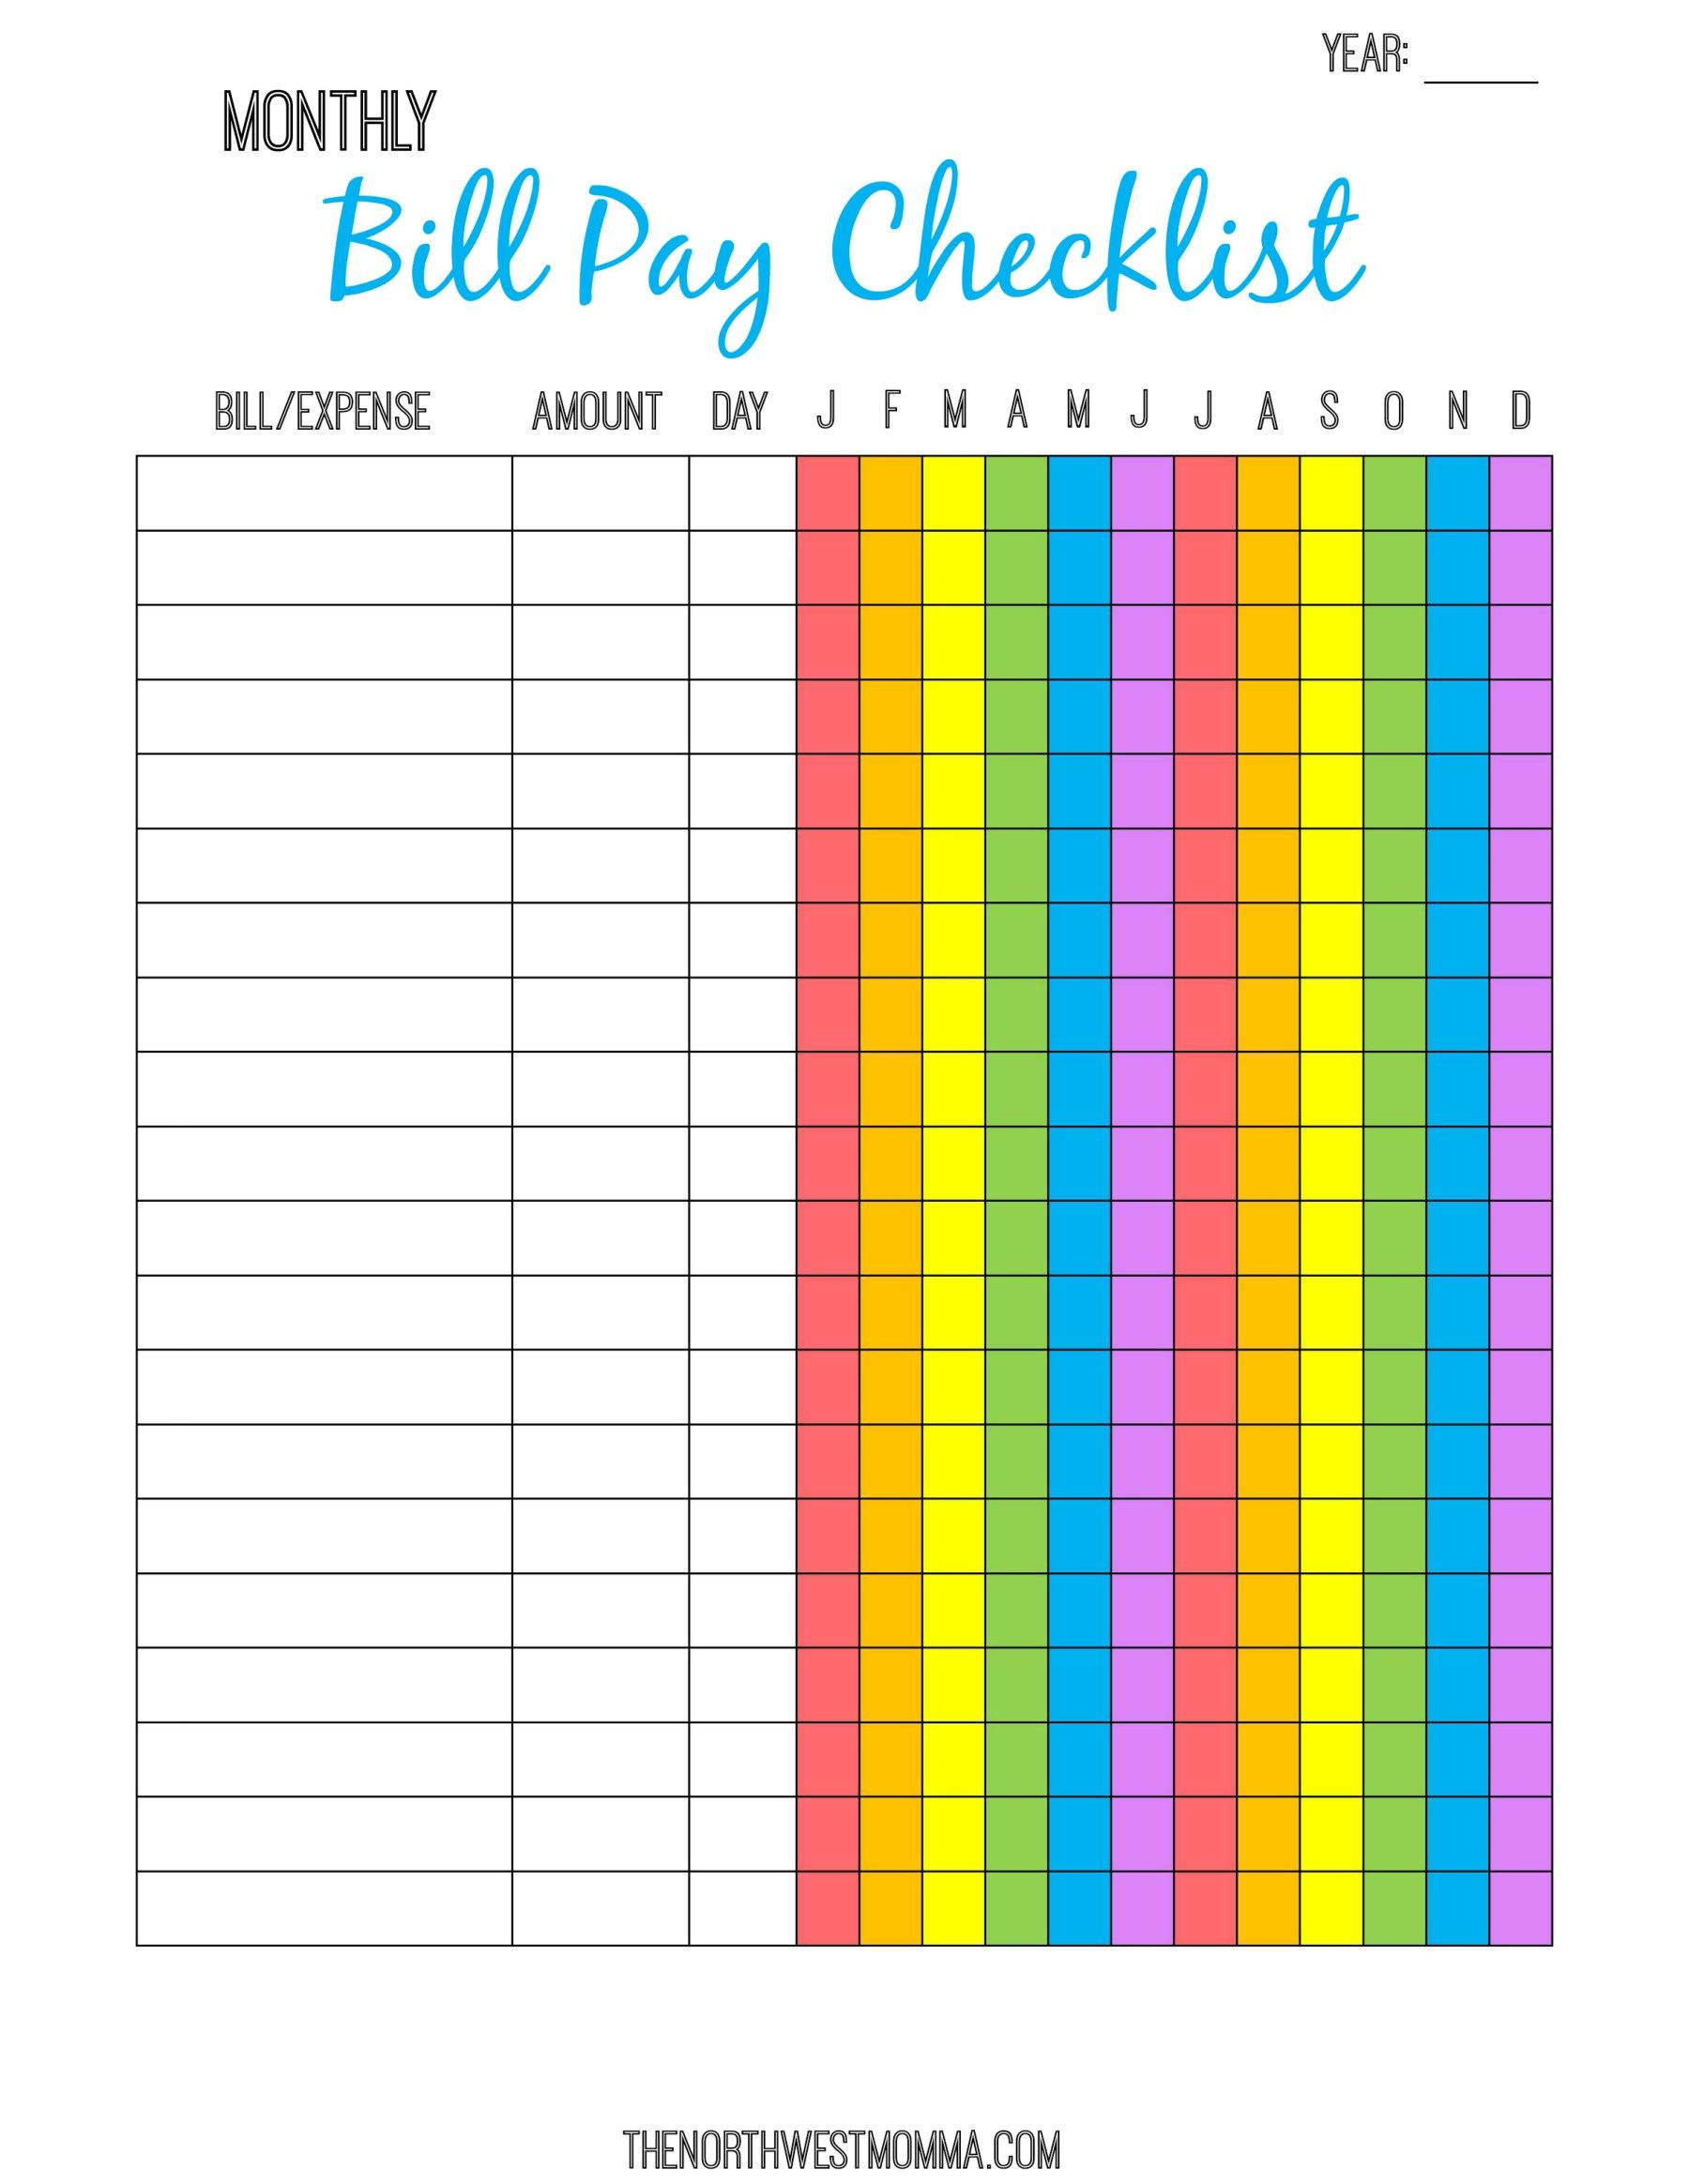 Monthly Bill Pay Checklist- Free Printable | $ Saving Money - Free Printable Bill Pay Checklist